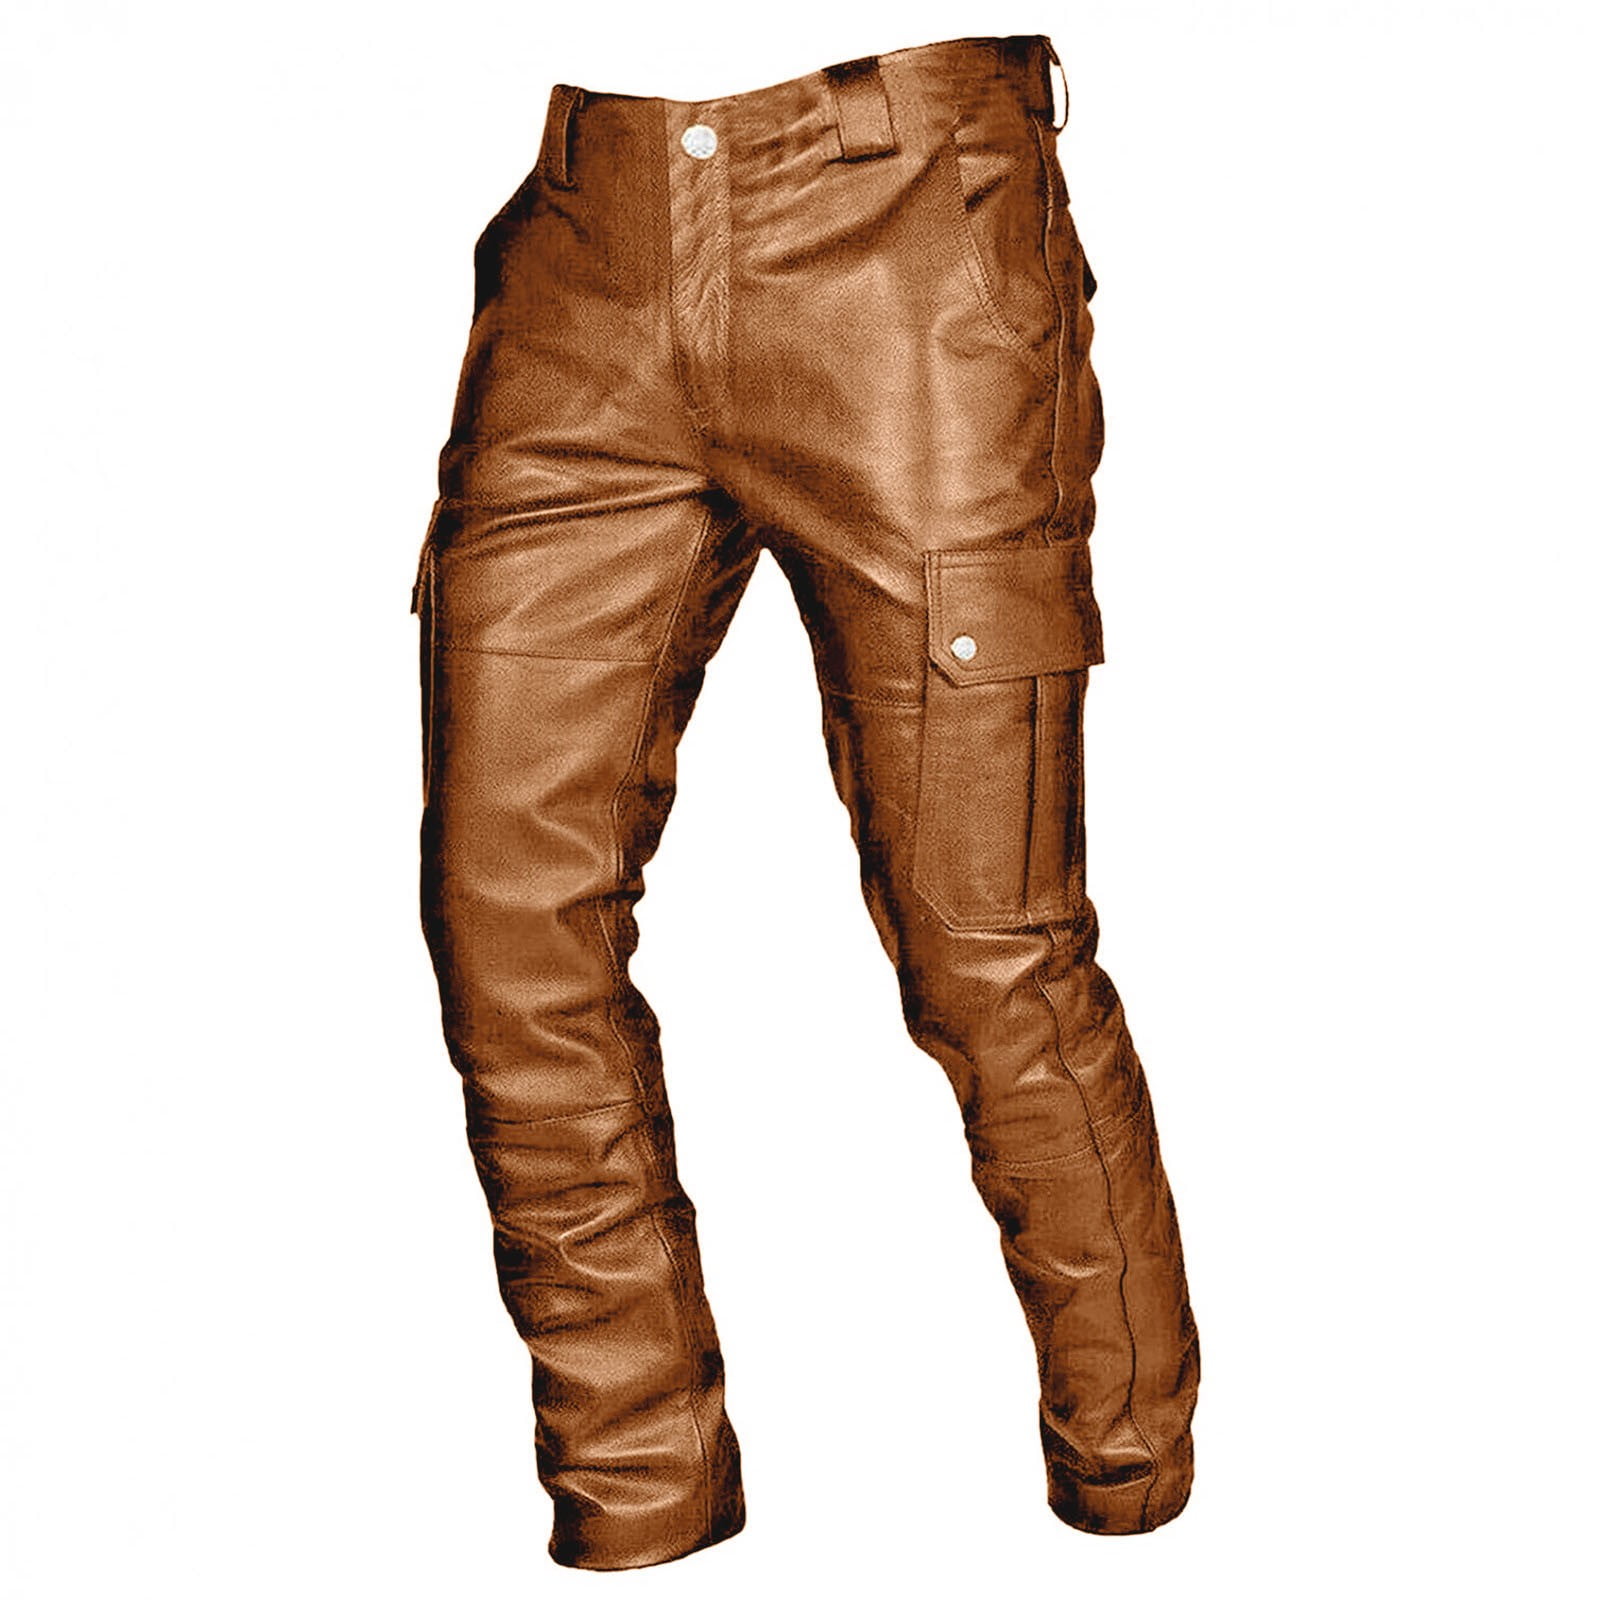 BOOTCUT LEATHER TROUSERS in orange